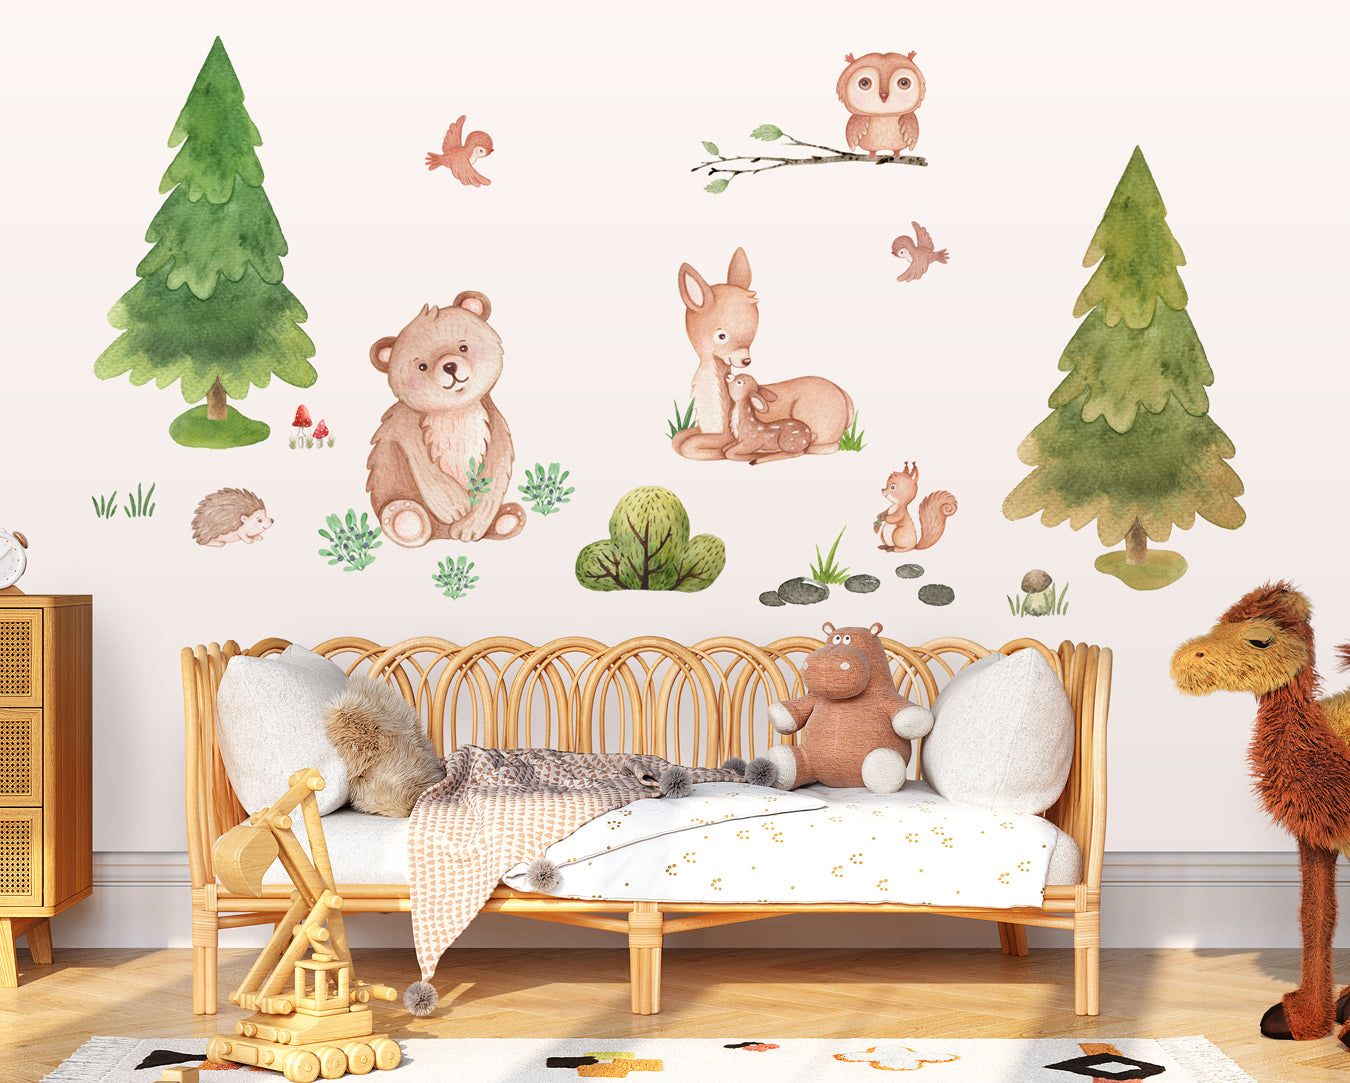 Forest animals - wall decals for children's room. Bear, trees and deer.